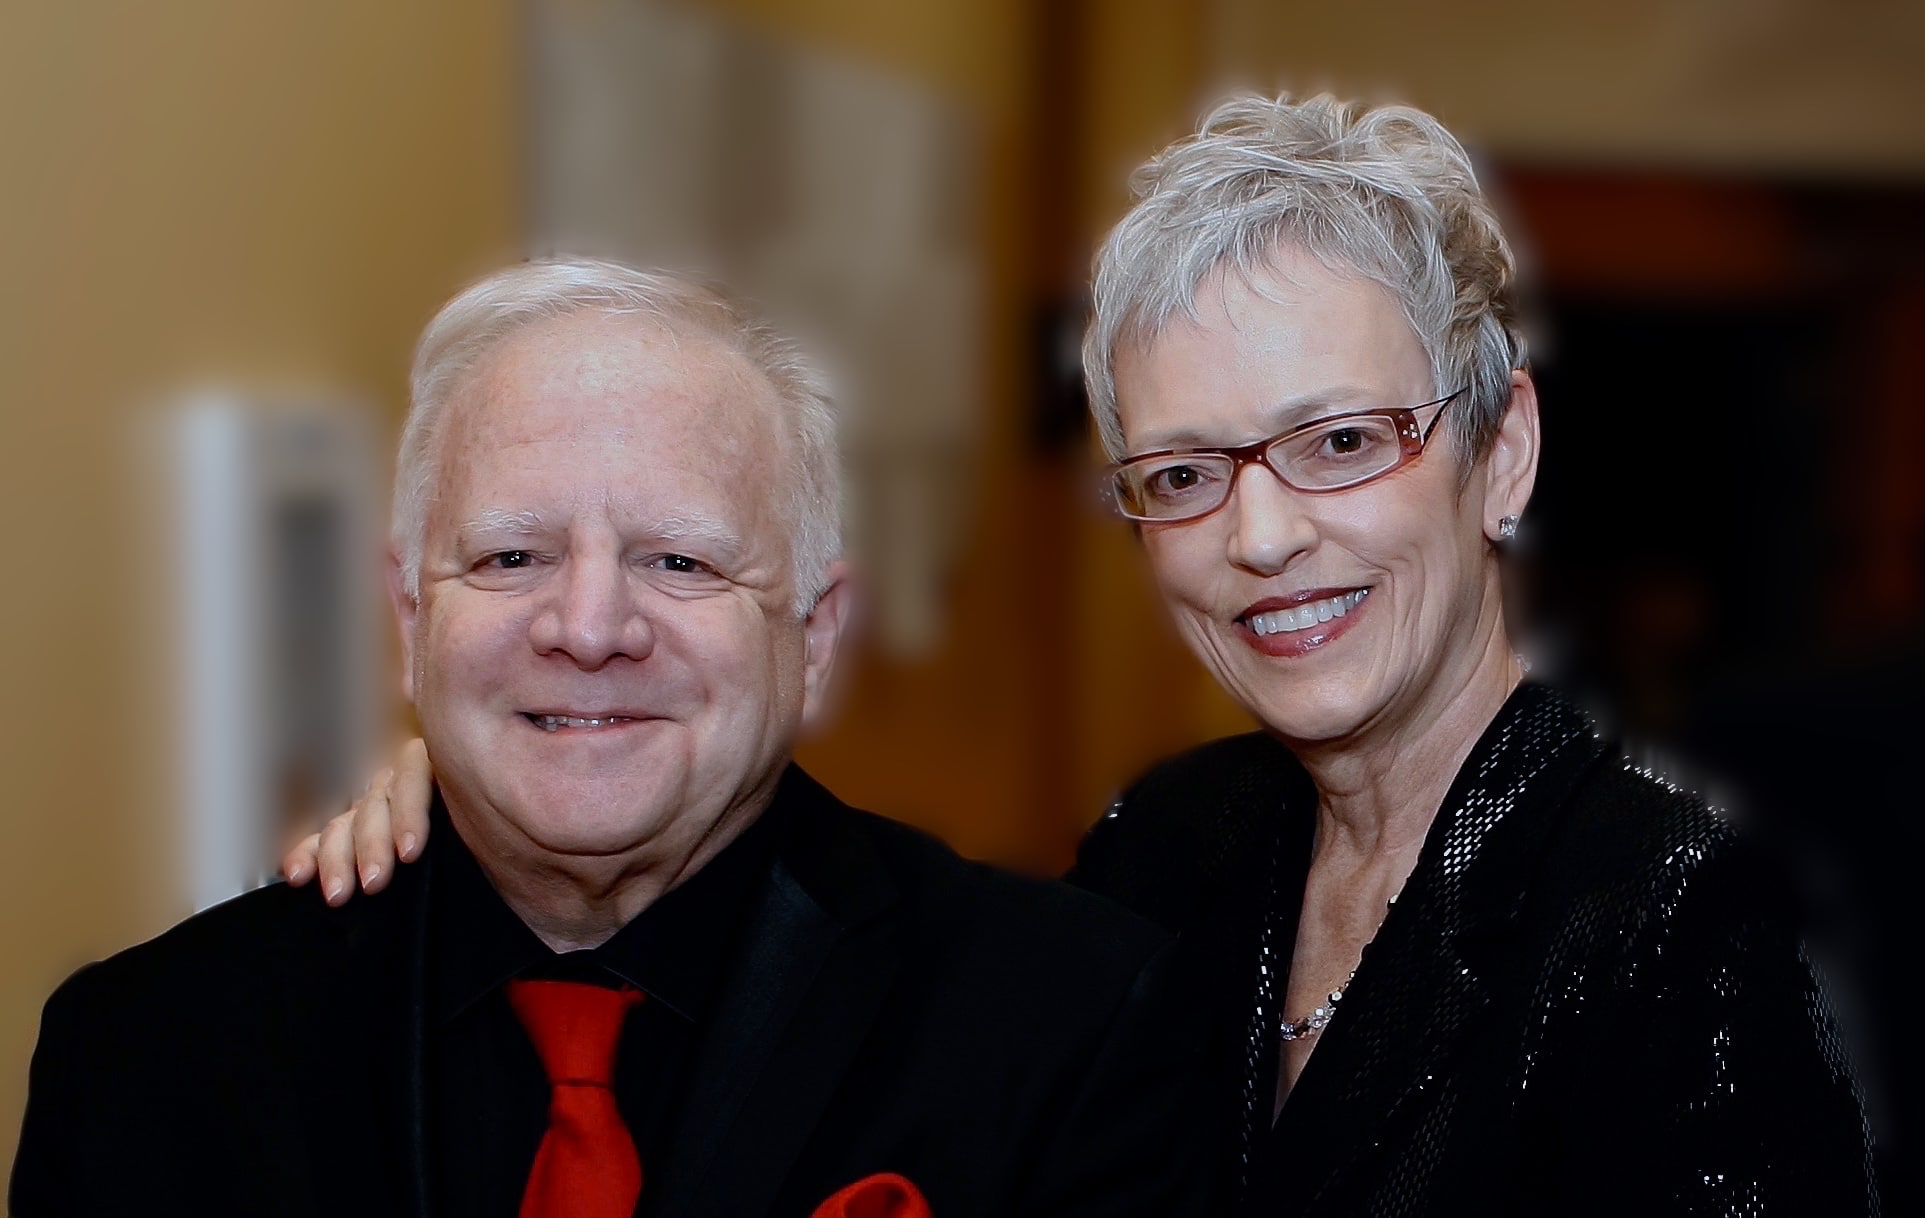 The Slatkins give $100,000 for Detroit young artists